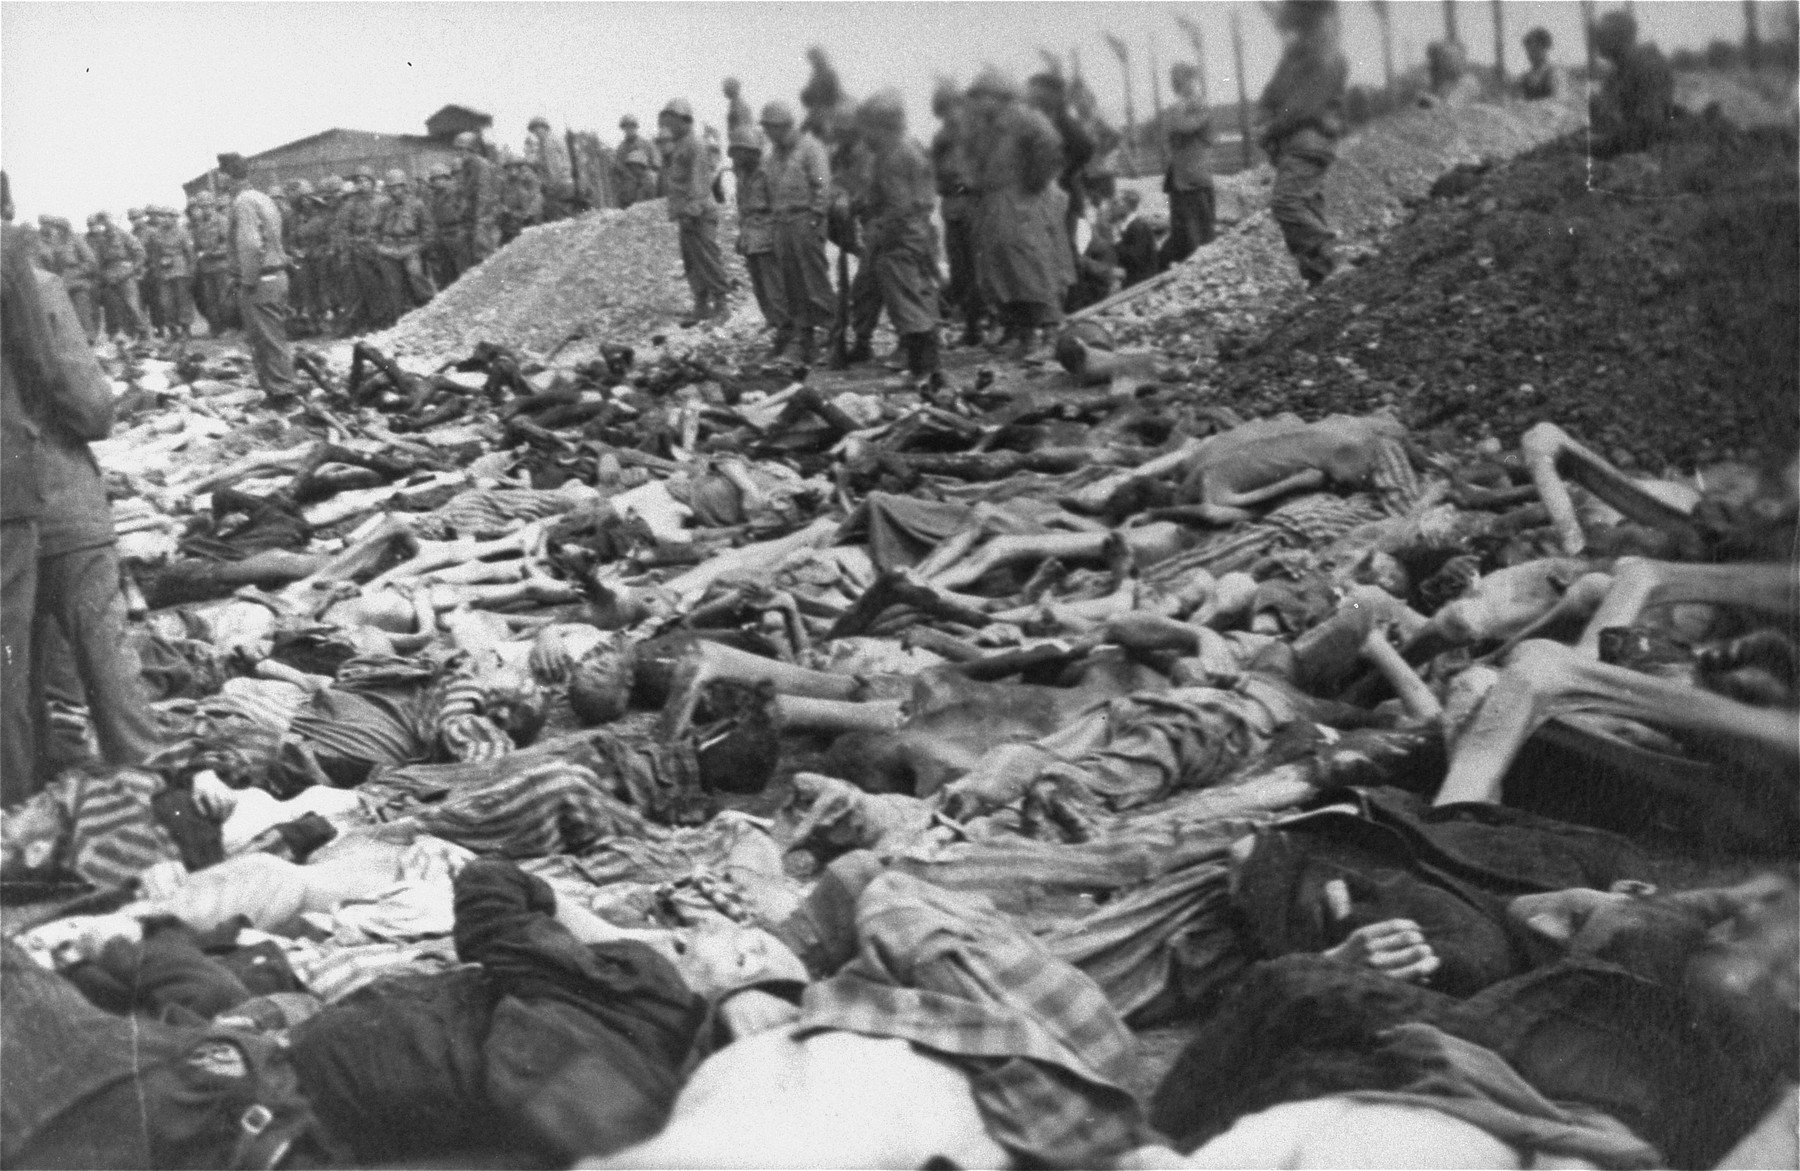 American troops look at rows of corpses in the Kaufering IV concentration camp, while Germans conscripted from the surrounding area dig mass graves.